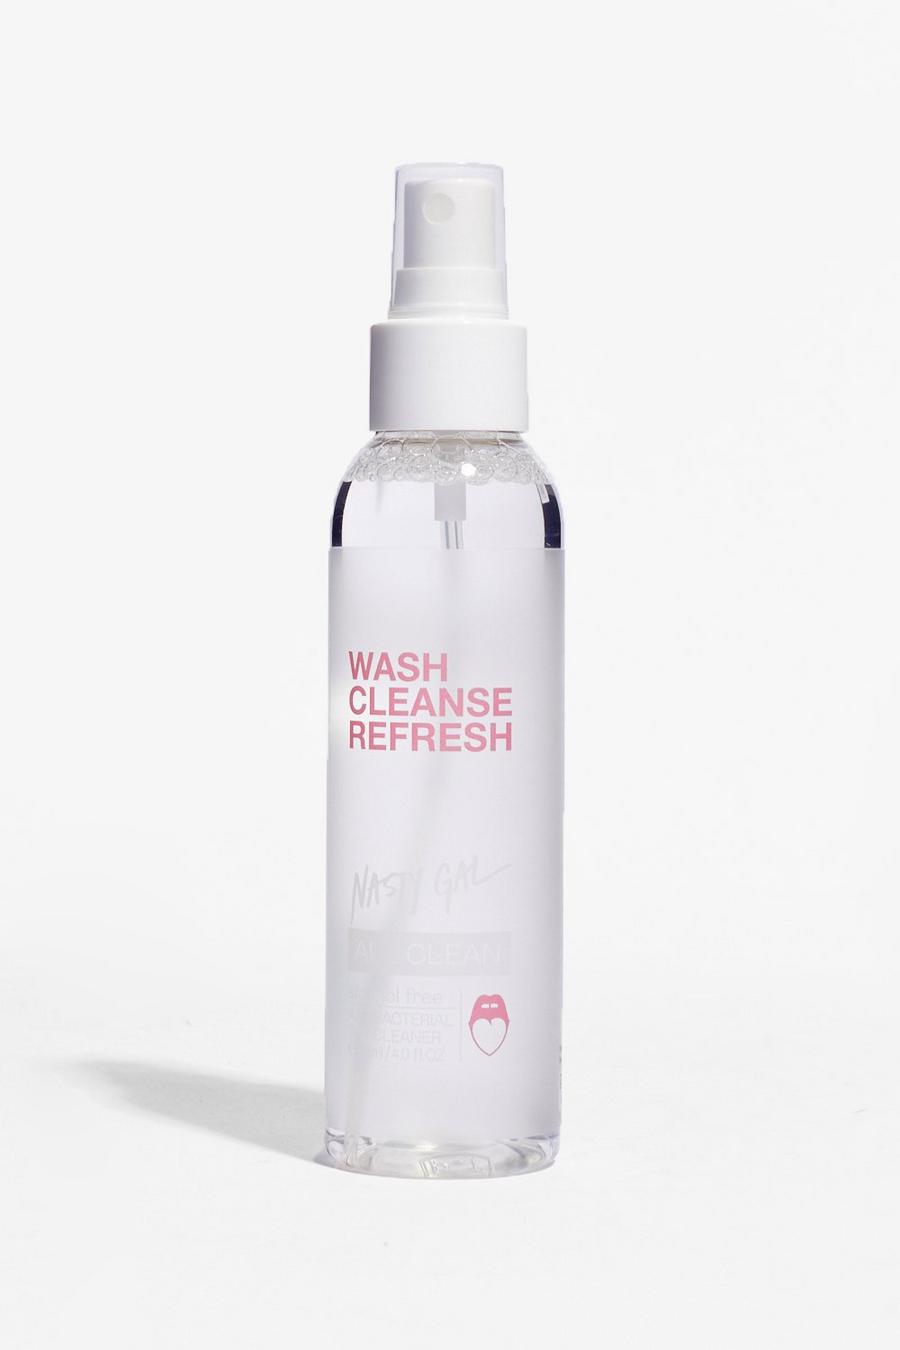 Wash Cleanse Refresh Toy Cleaner